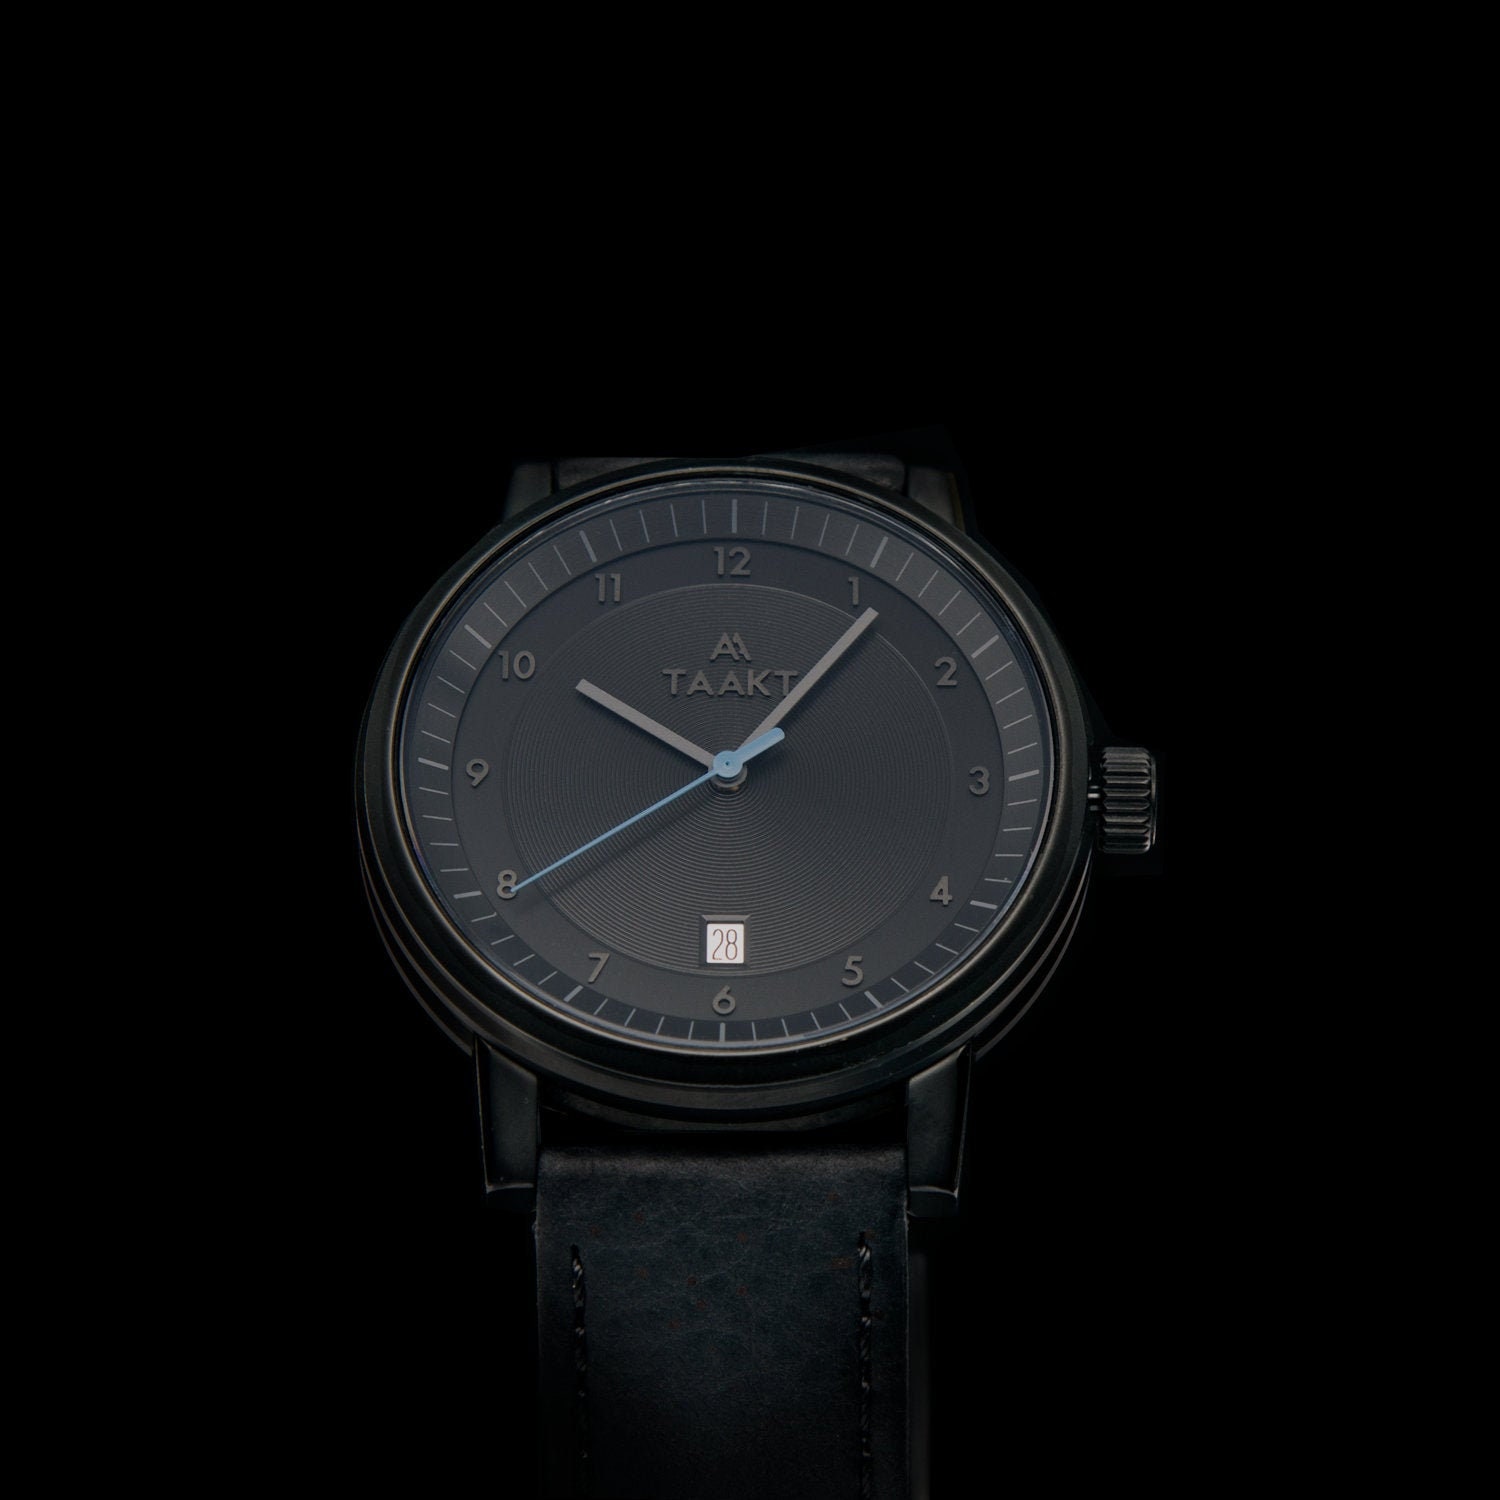 Black Minimalist Swiss Movement Leather Watch With Blue Hands - Etsy